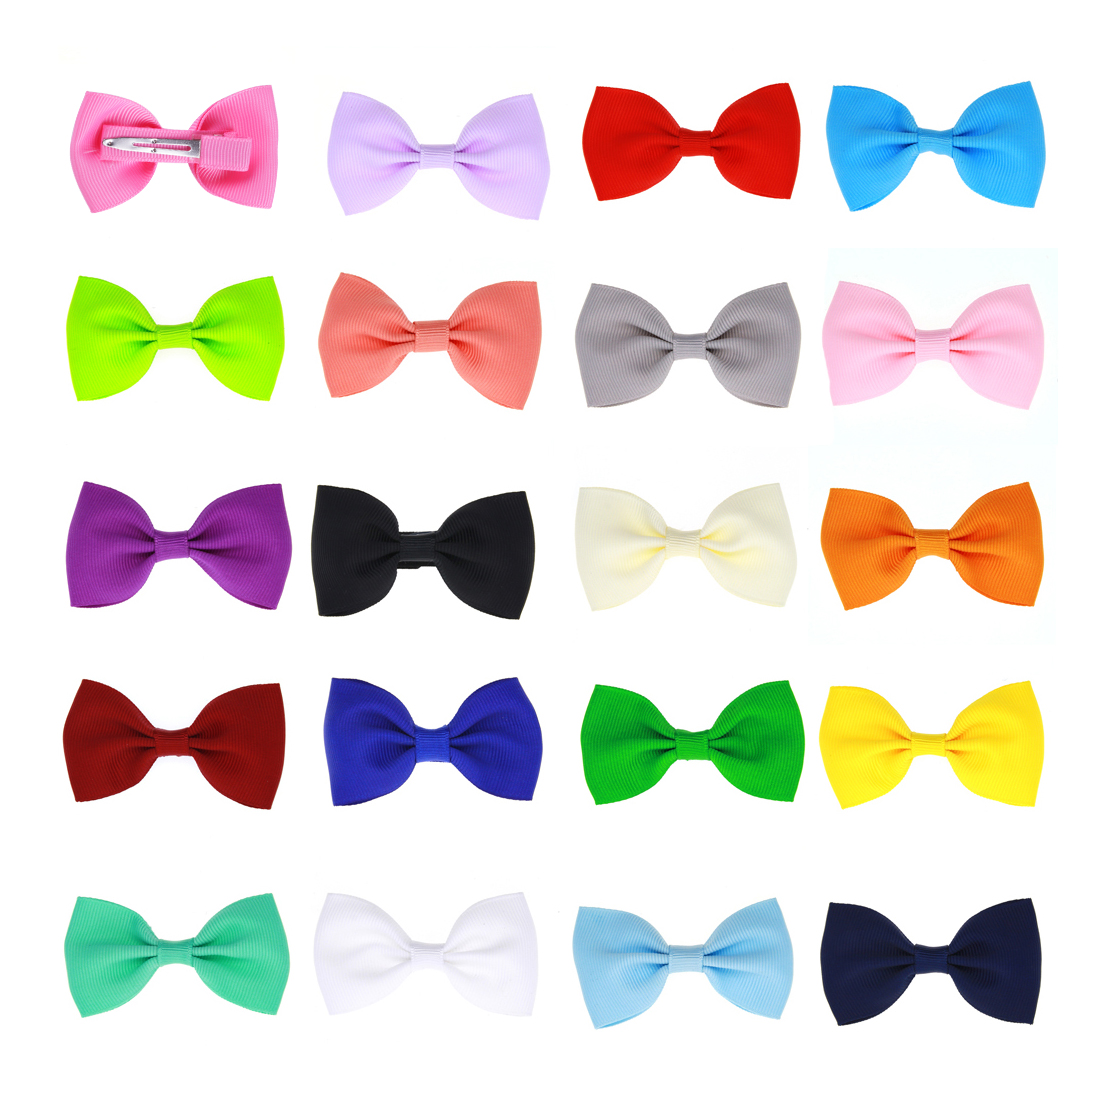 20 Pcs 2.75 inch Baby Girl Boutique Grosgrain Ribbon Hair Bows Alligator Clips For Teens Kids Toddlers Children(2.75 Inch)